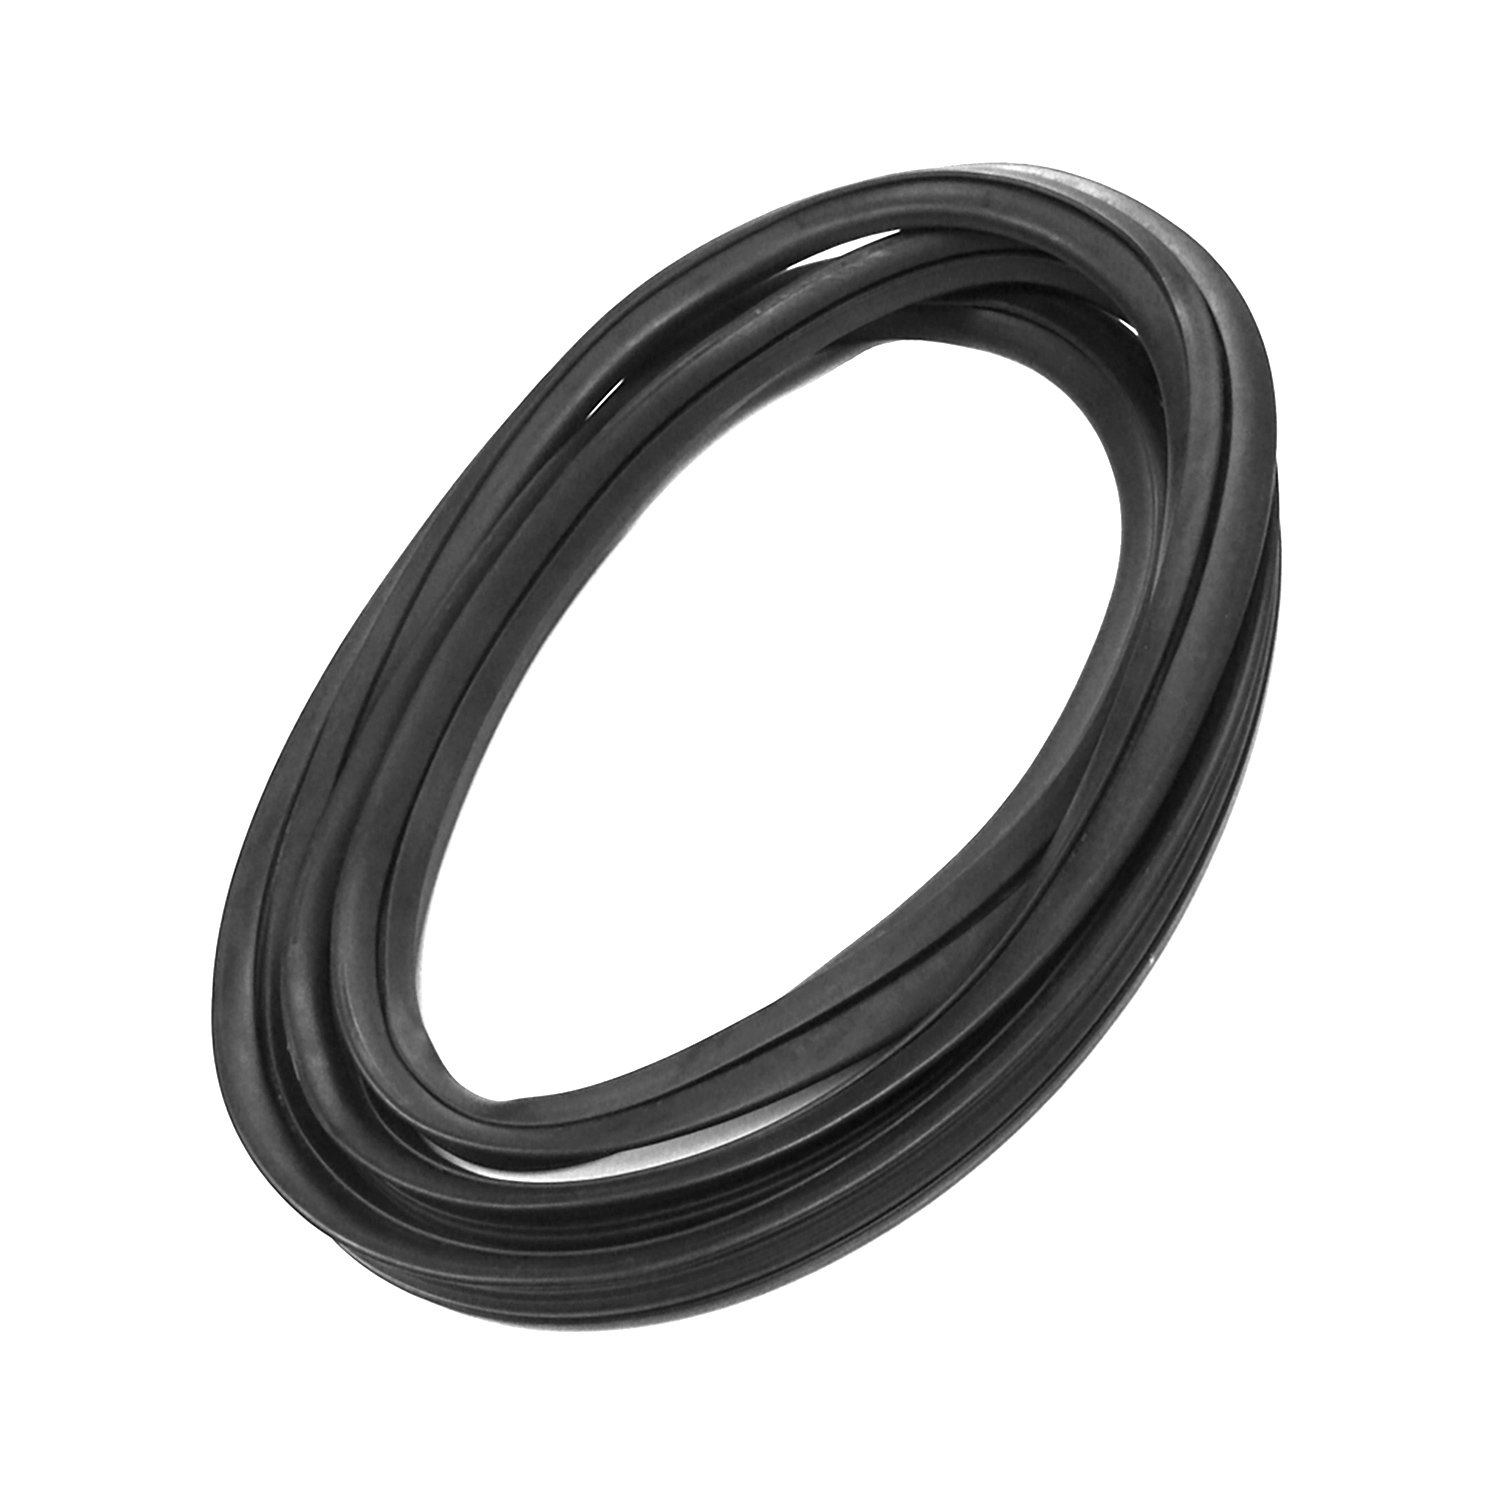 1978 Chevrolet G30 Windshield Seal, 71-80 GM Full Size Van With Trim Groove, Each-VWS 7324-A